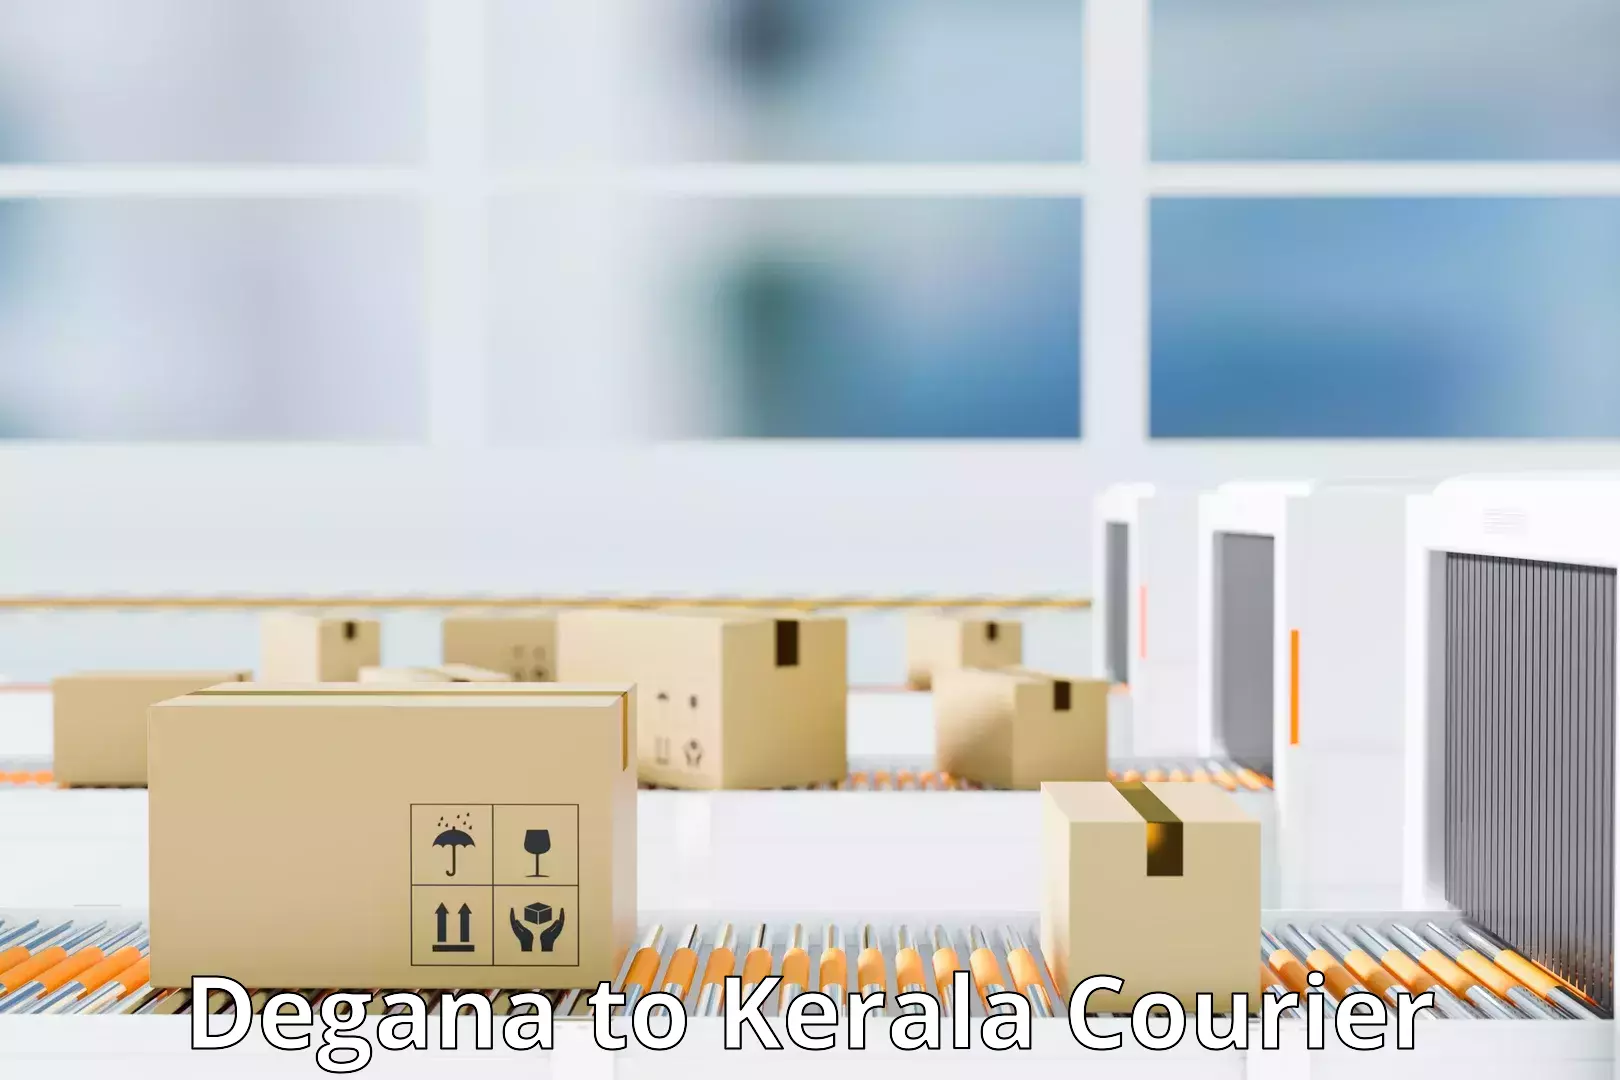 Efficient package consolidation Degana to Kerala